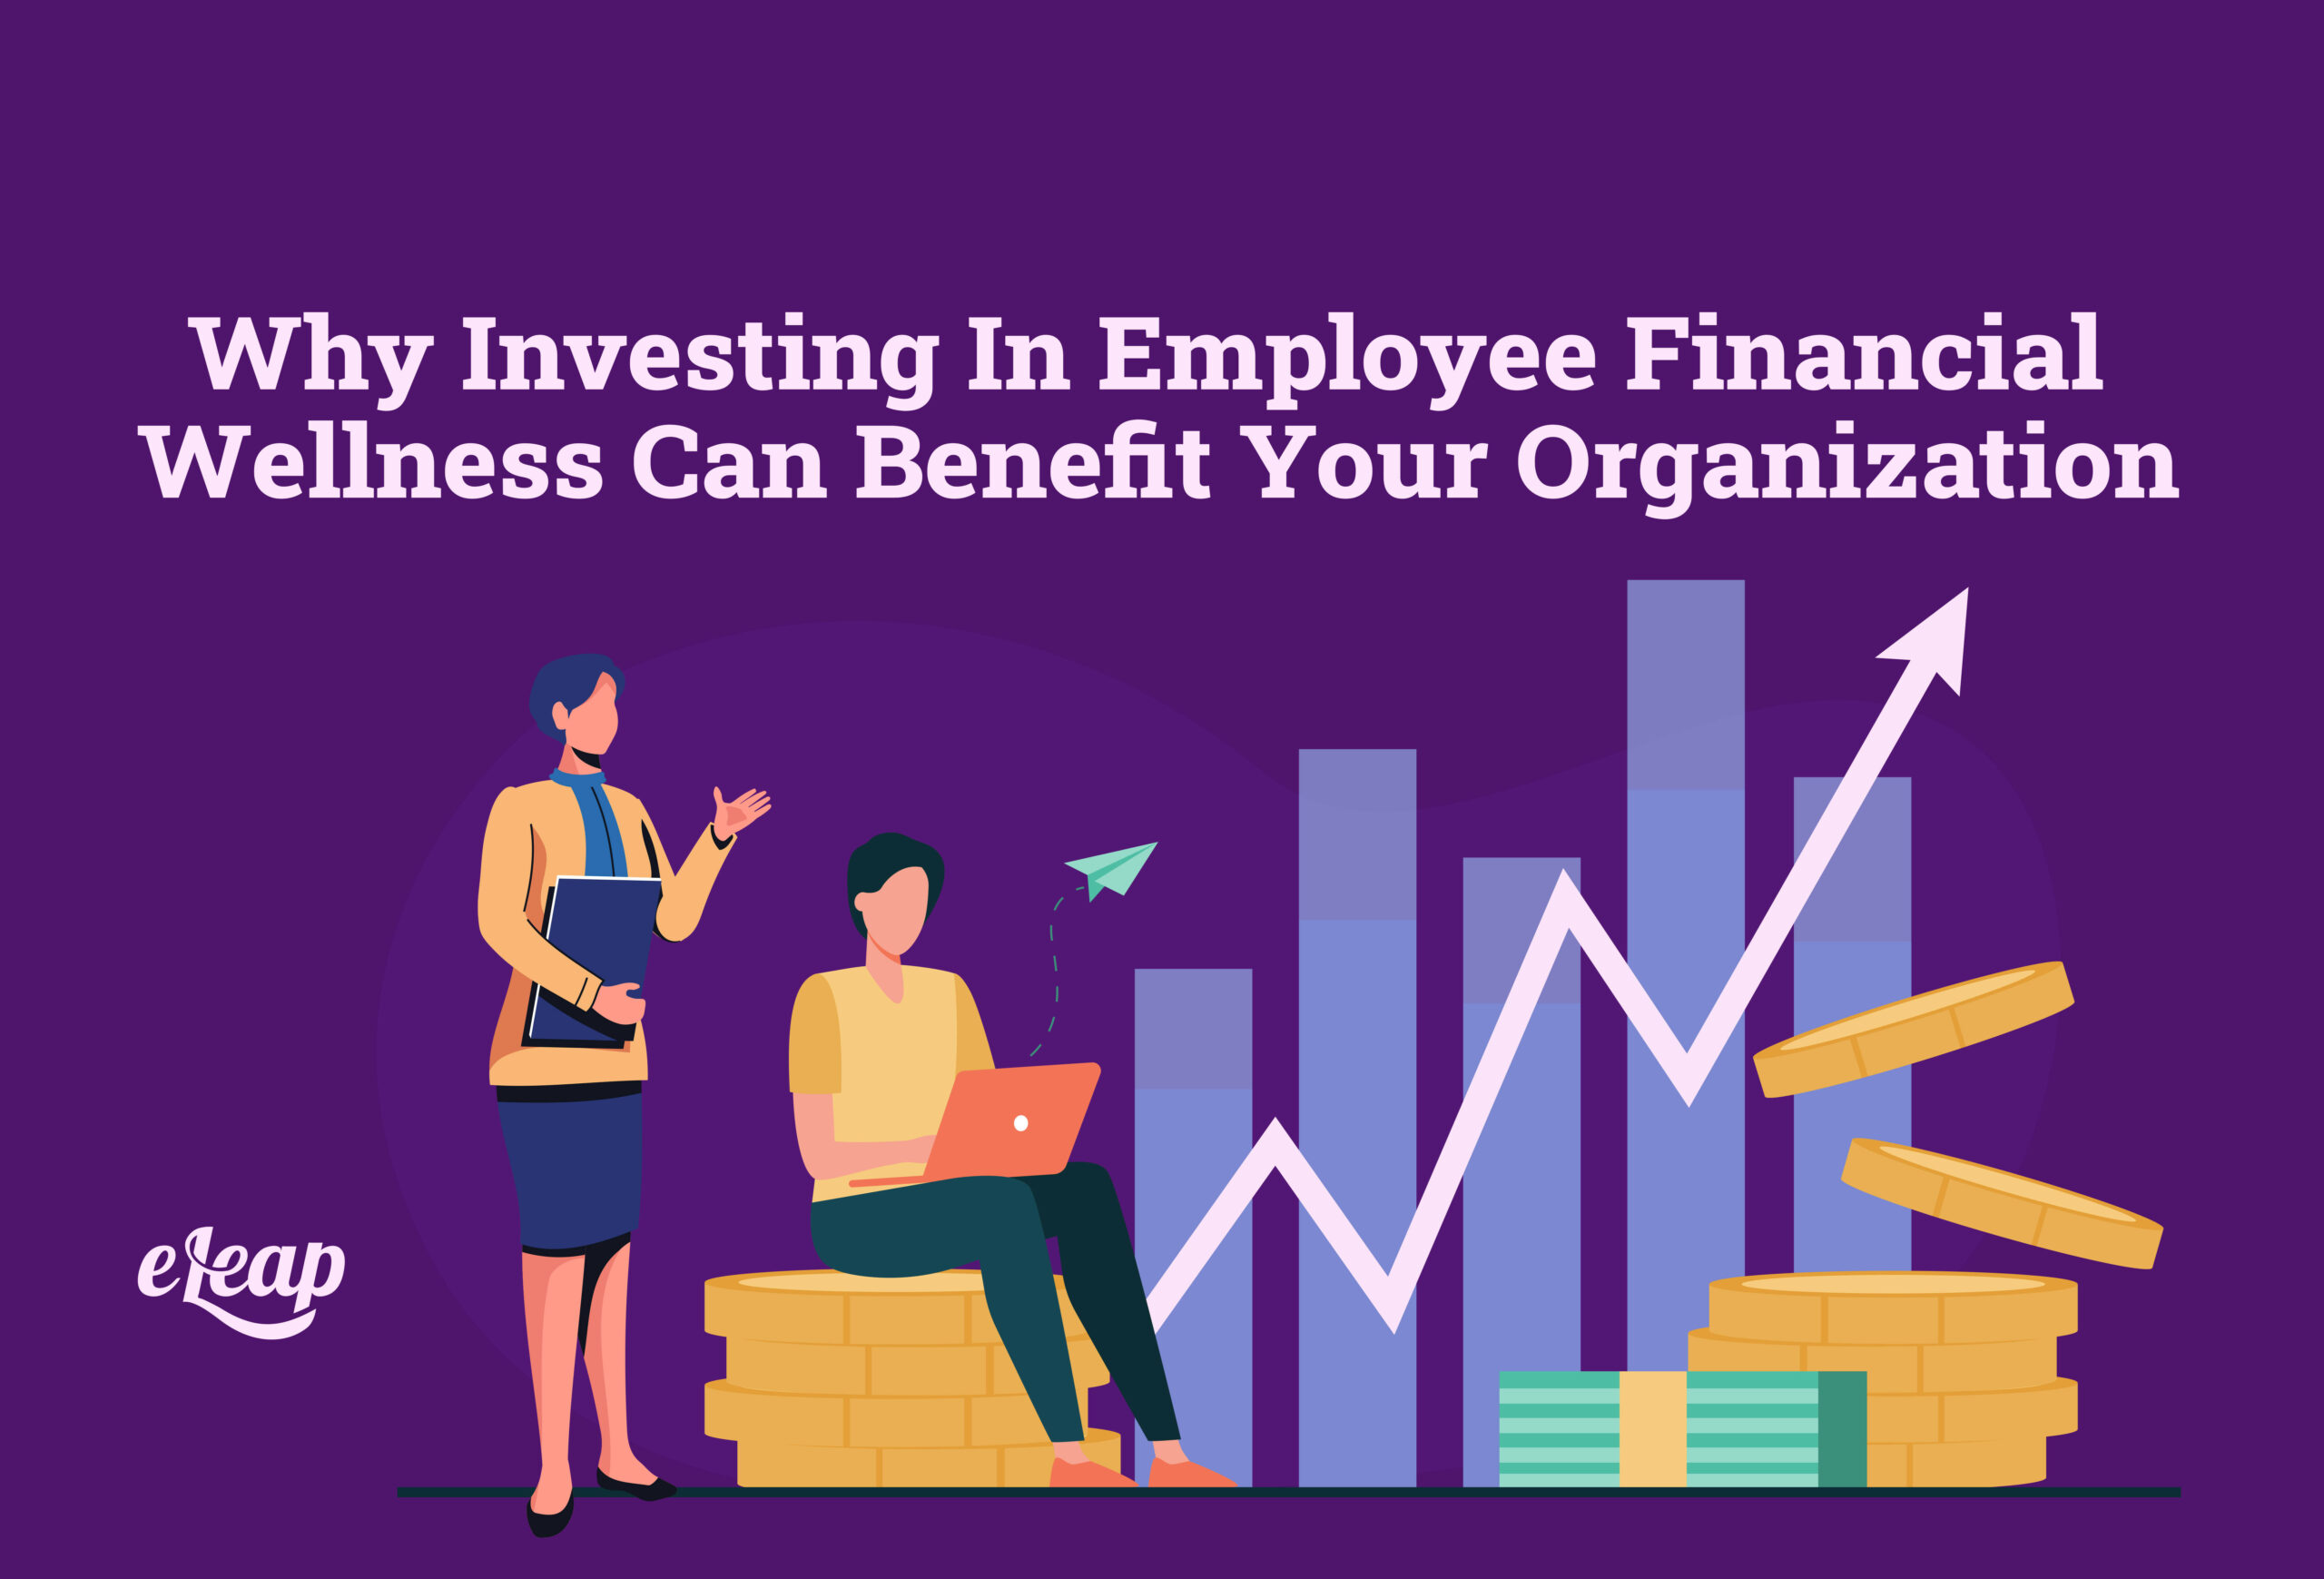 Why Investing In Employee Financial Wellness Can Benefit Your Organization